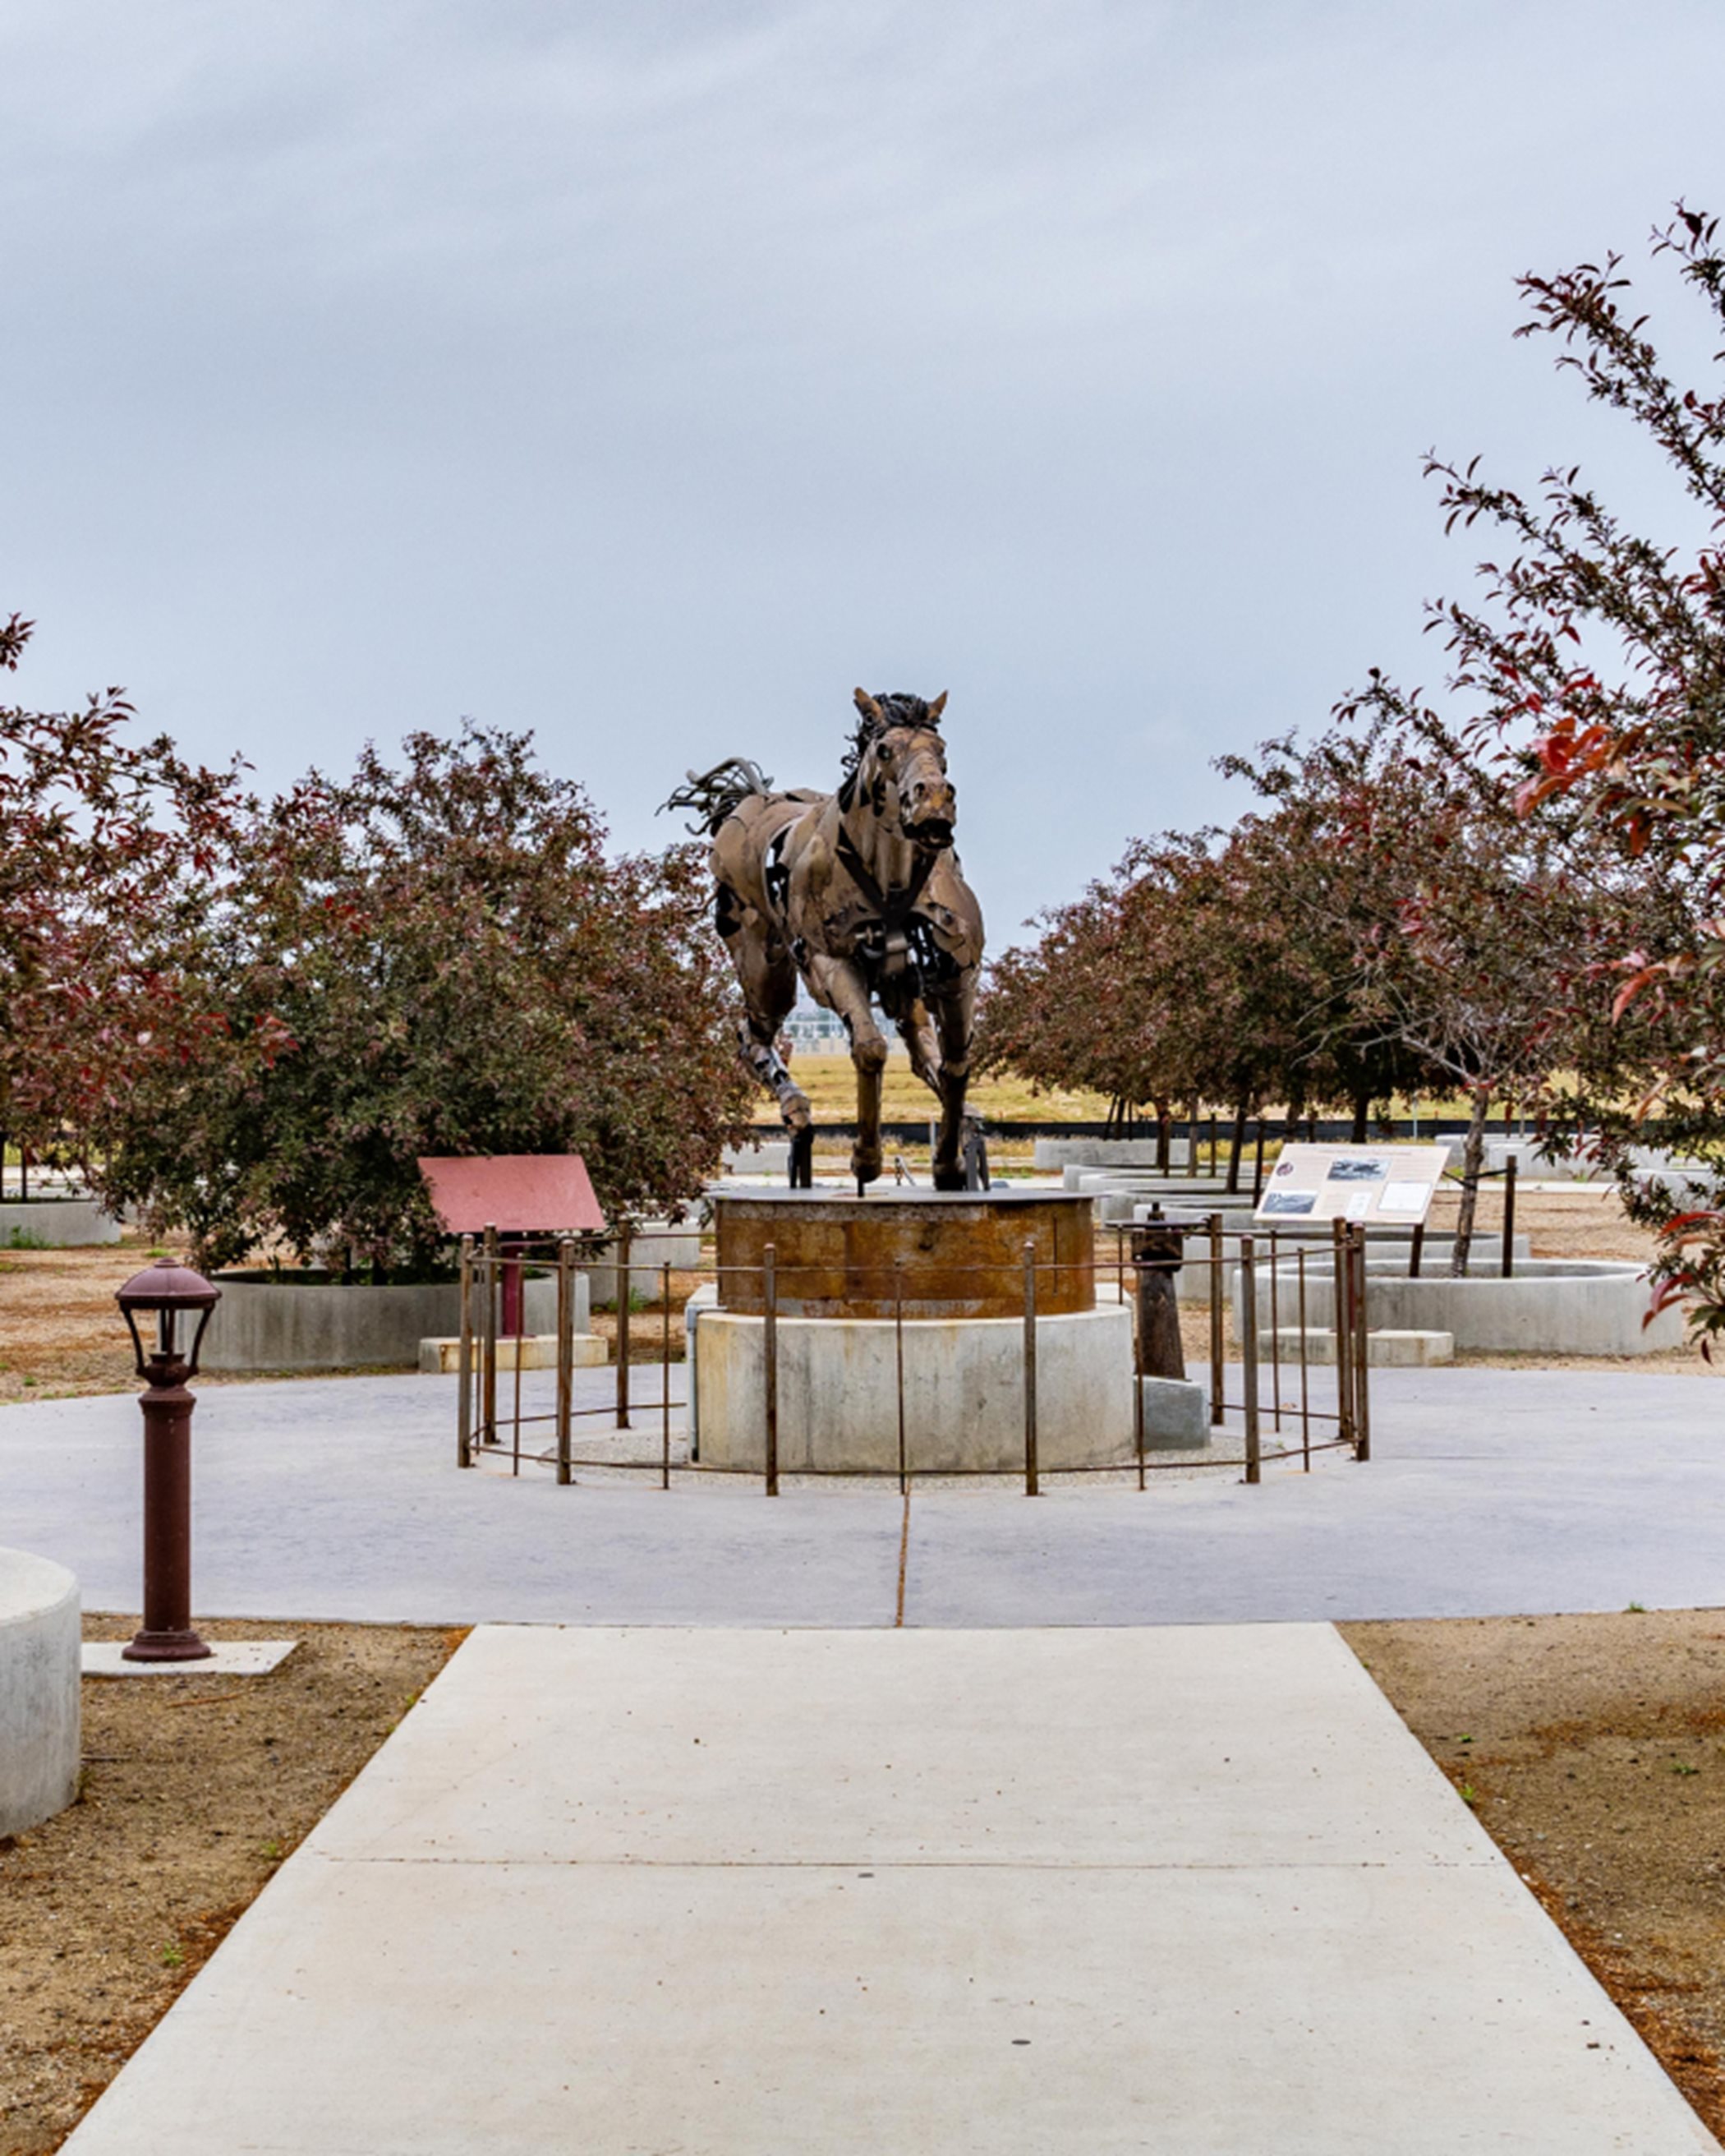 The Horse Statue at Dry Creek Trailhead